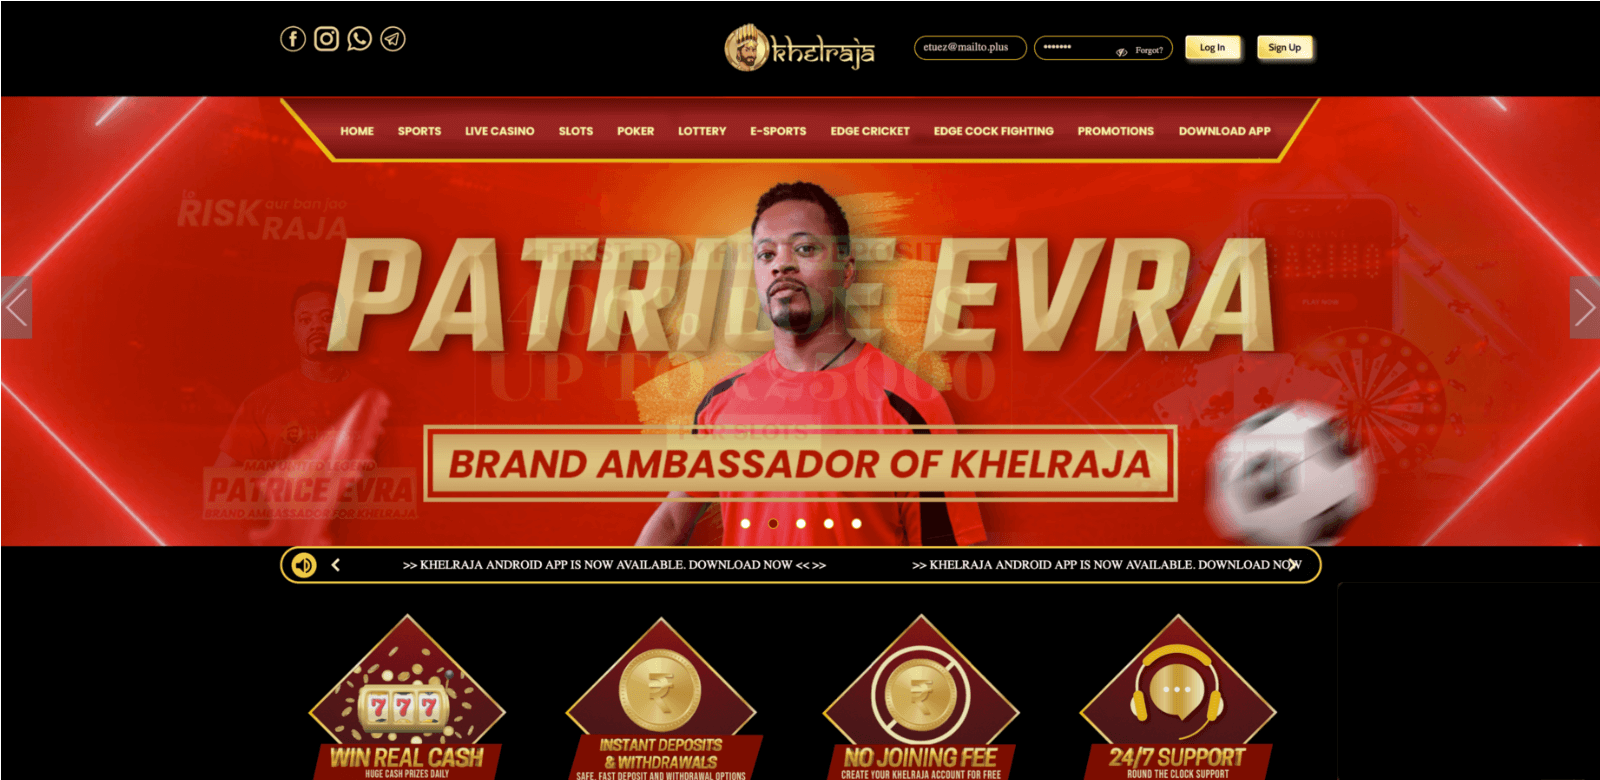 Home page of Khelraja website